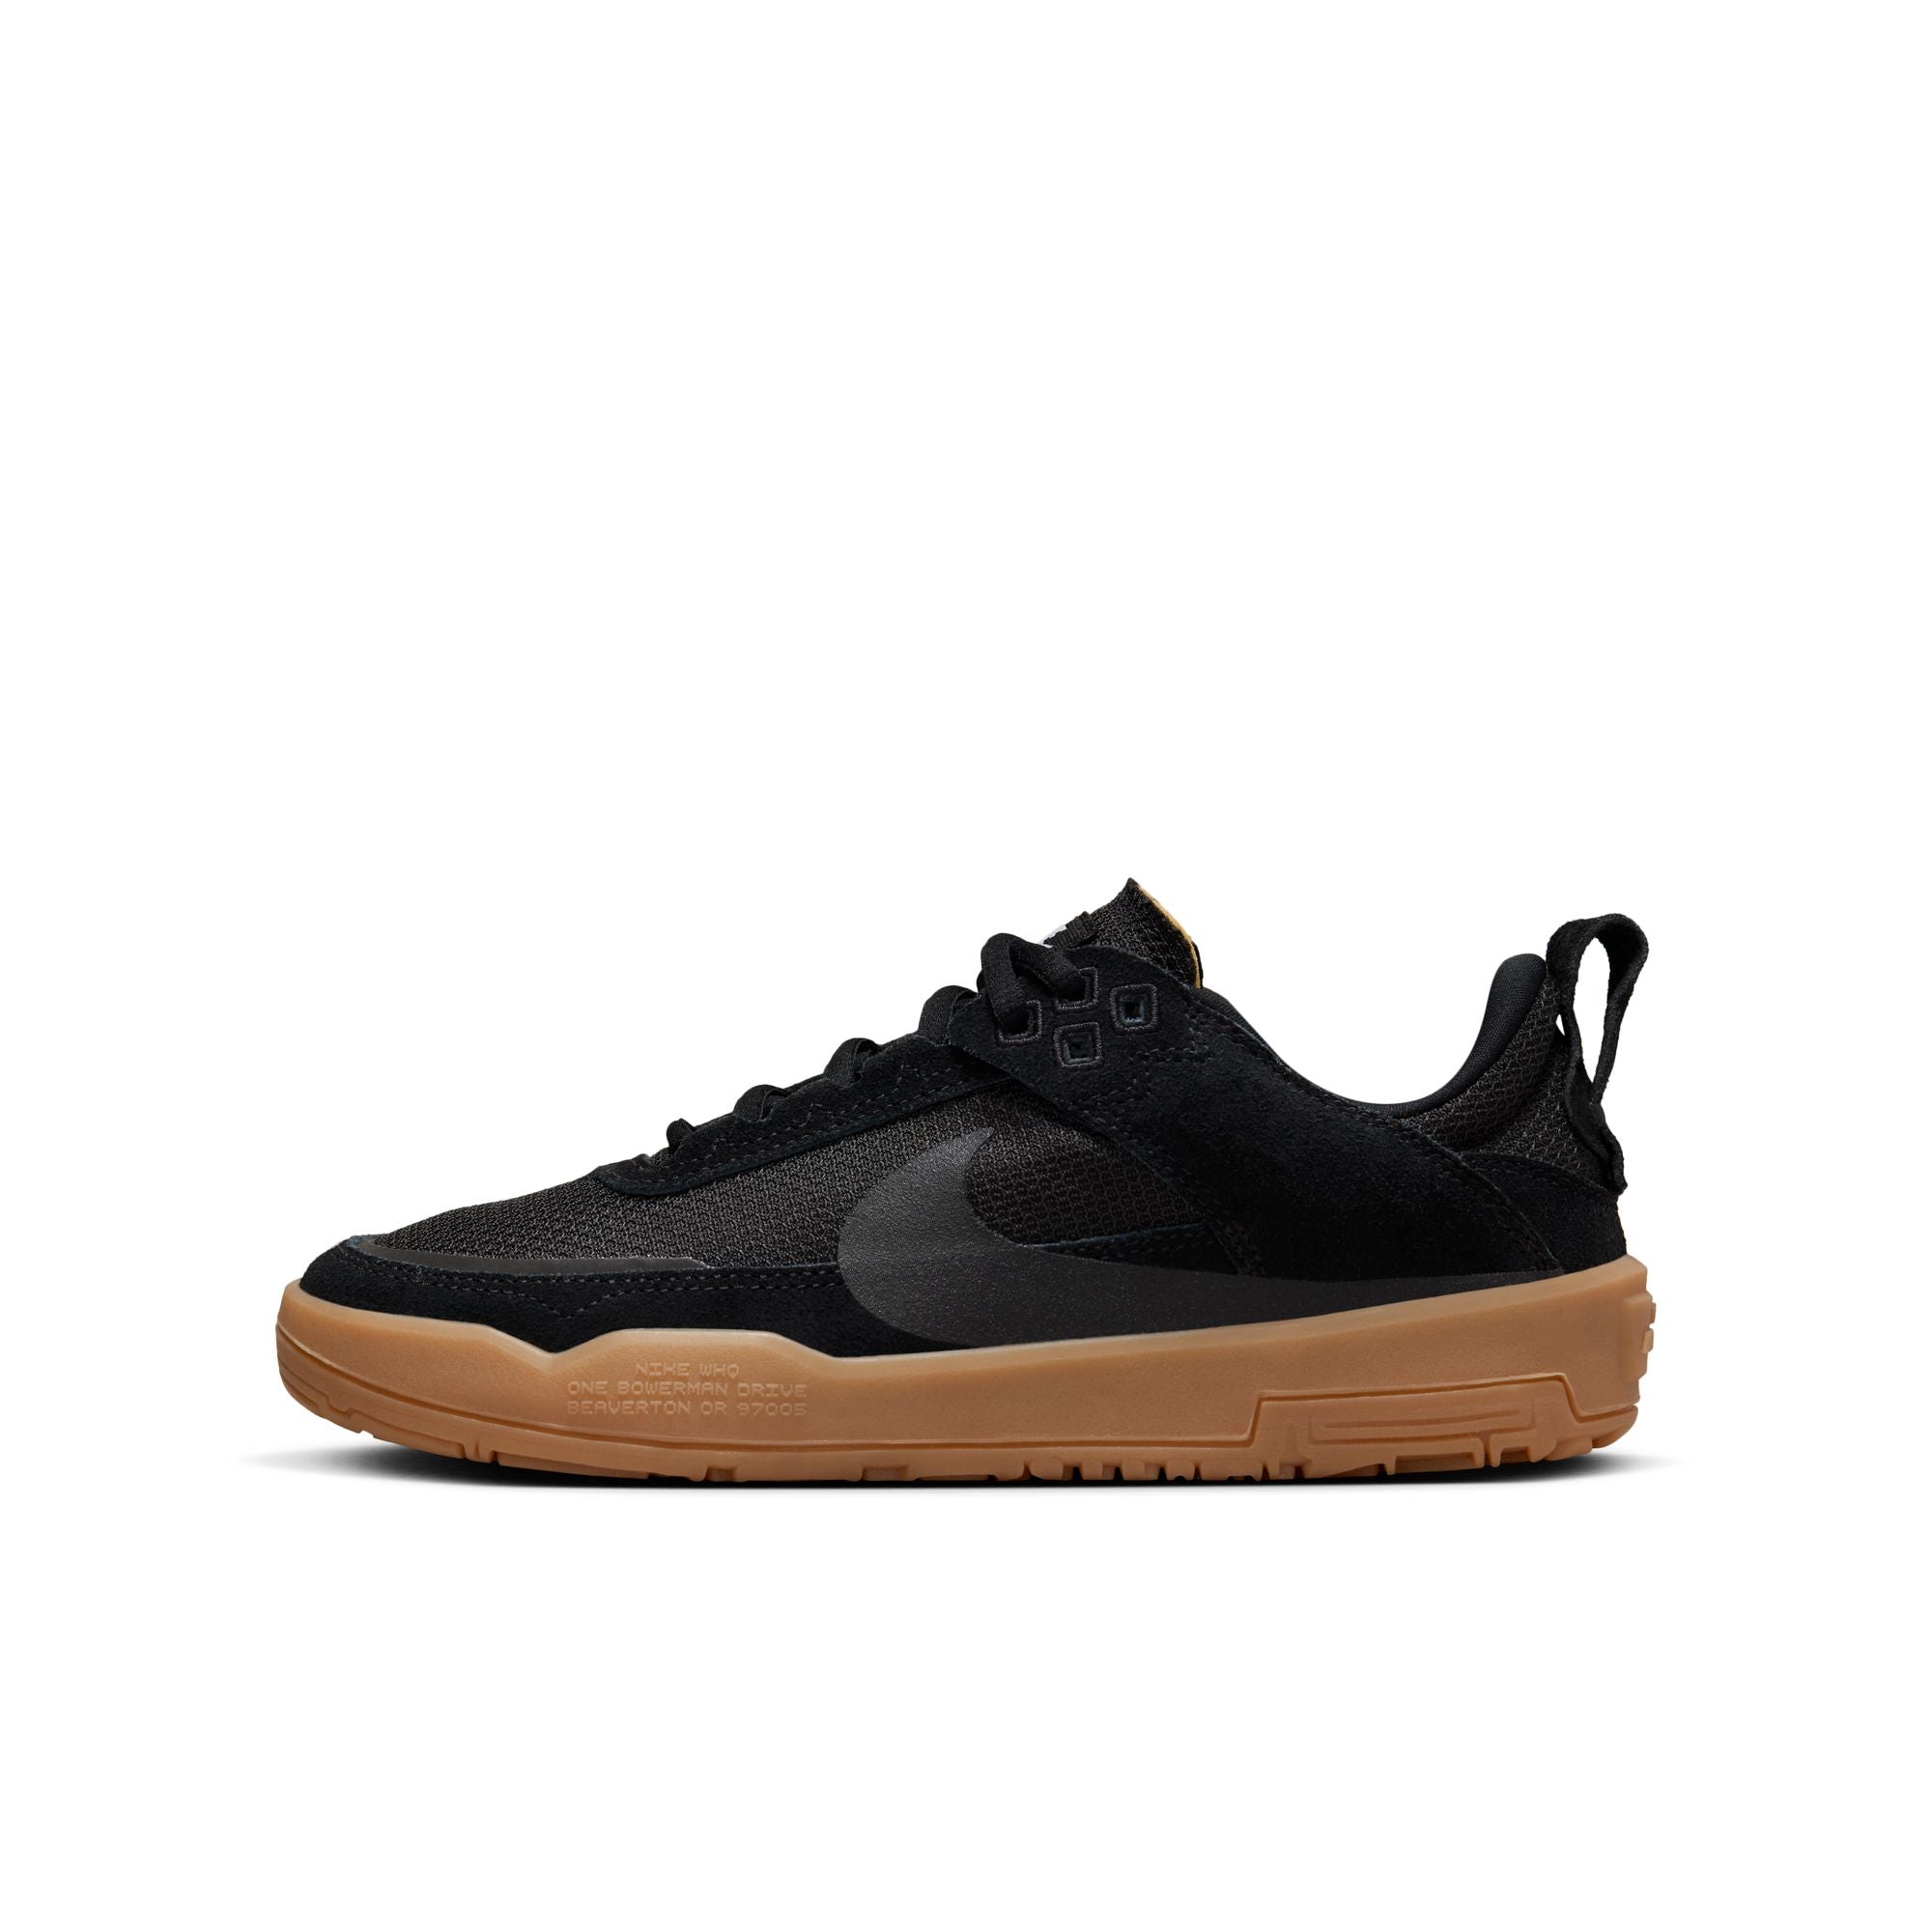 Black nike sb low top kids trainers with black nike swoosh and gum sole. Free uk shipping over £50